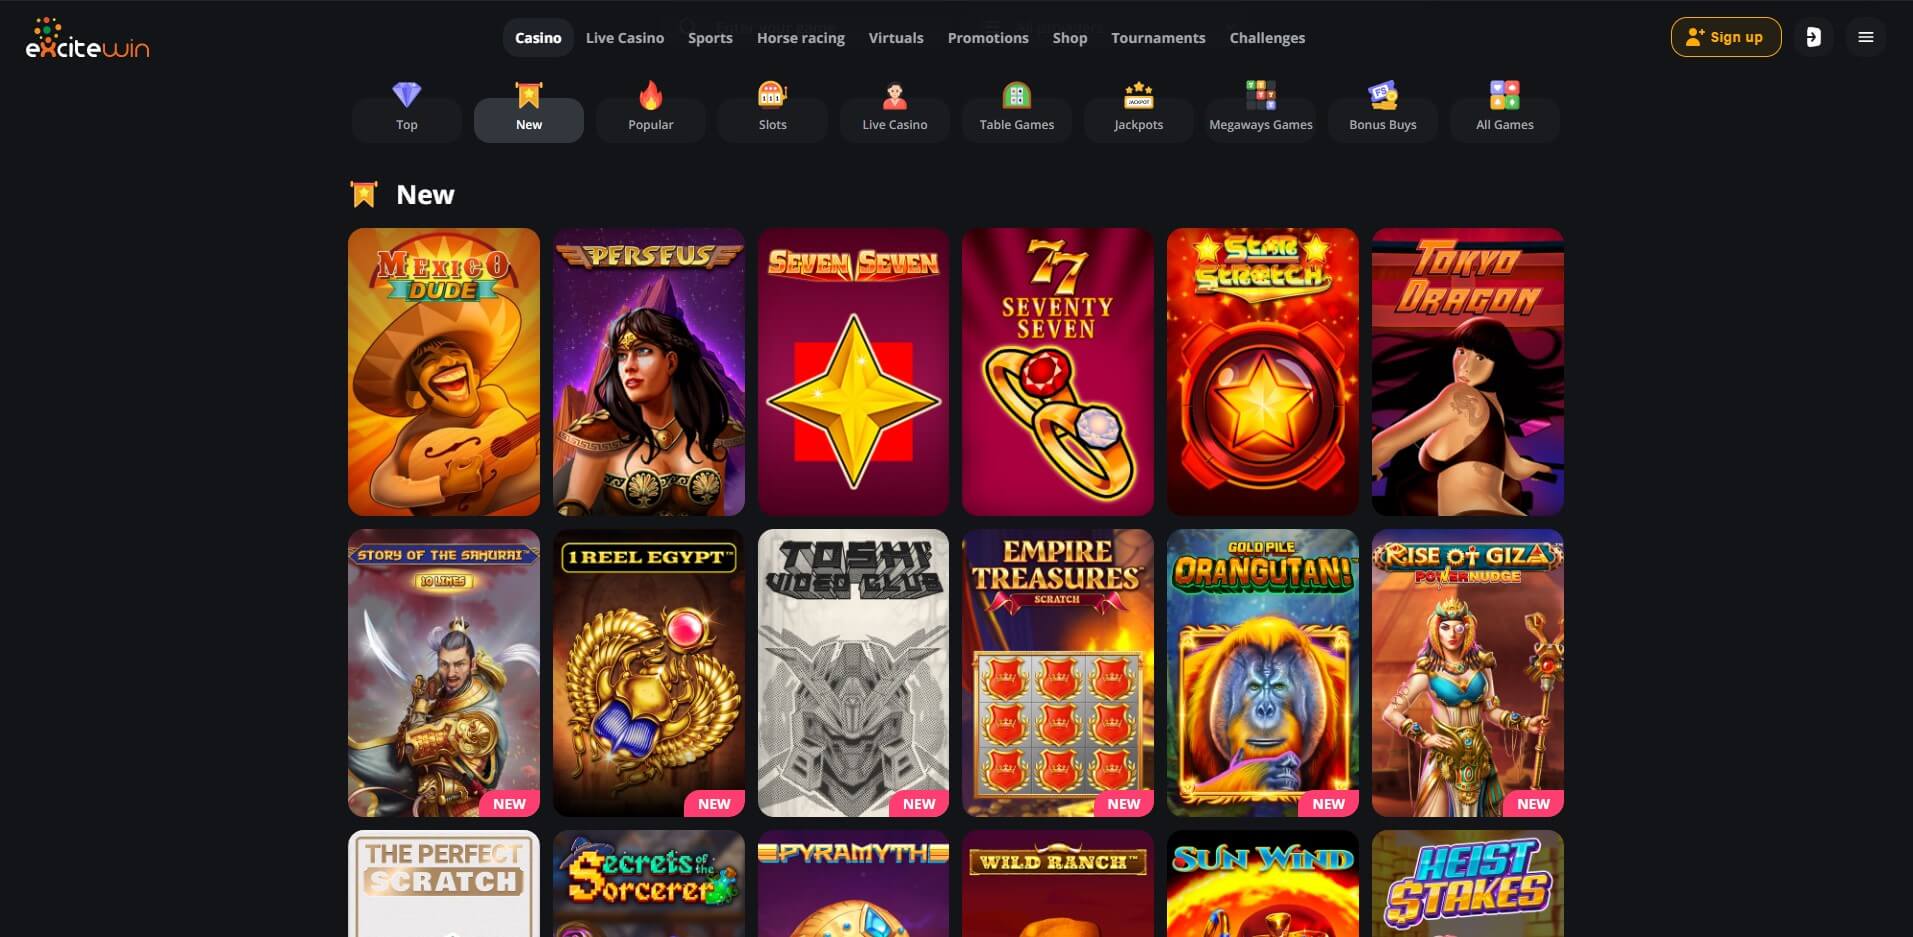 Games at ExciteWin Casino